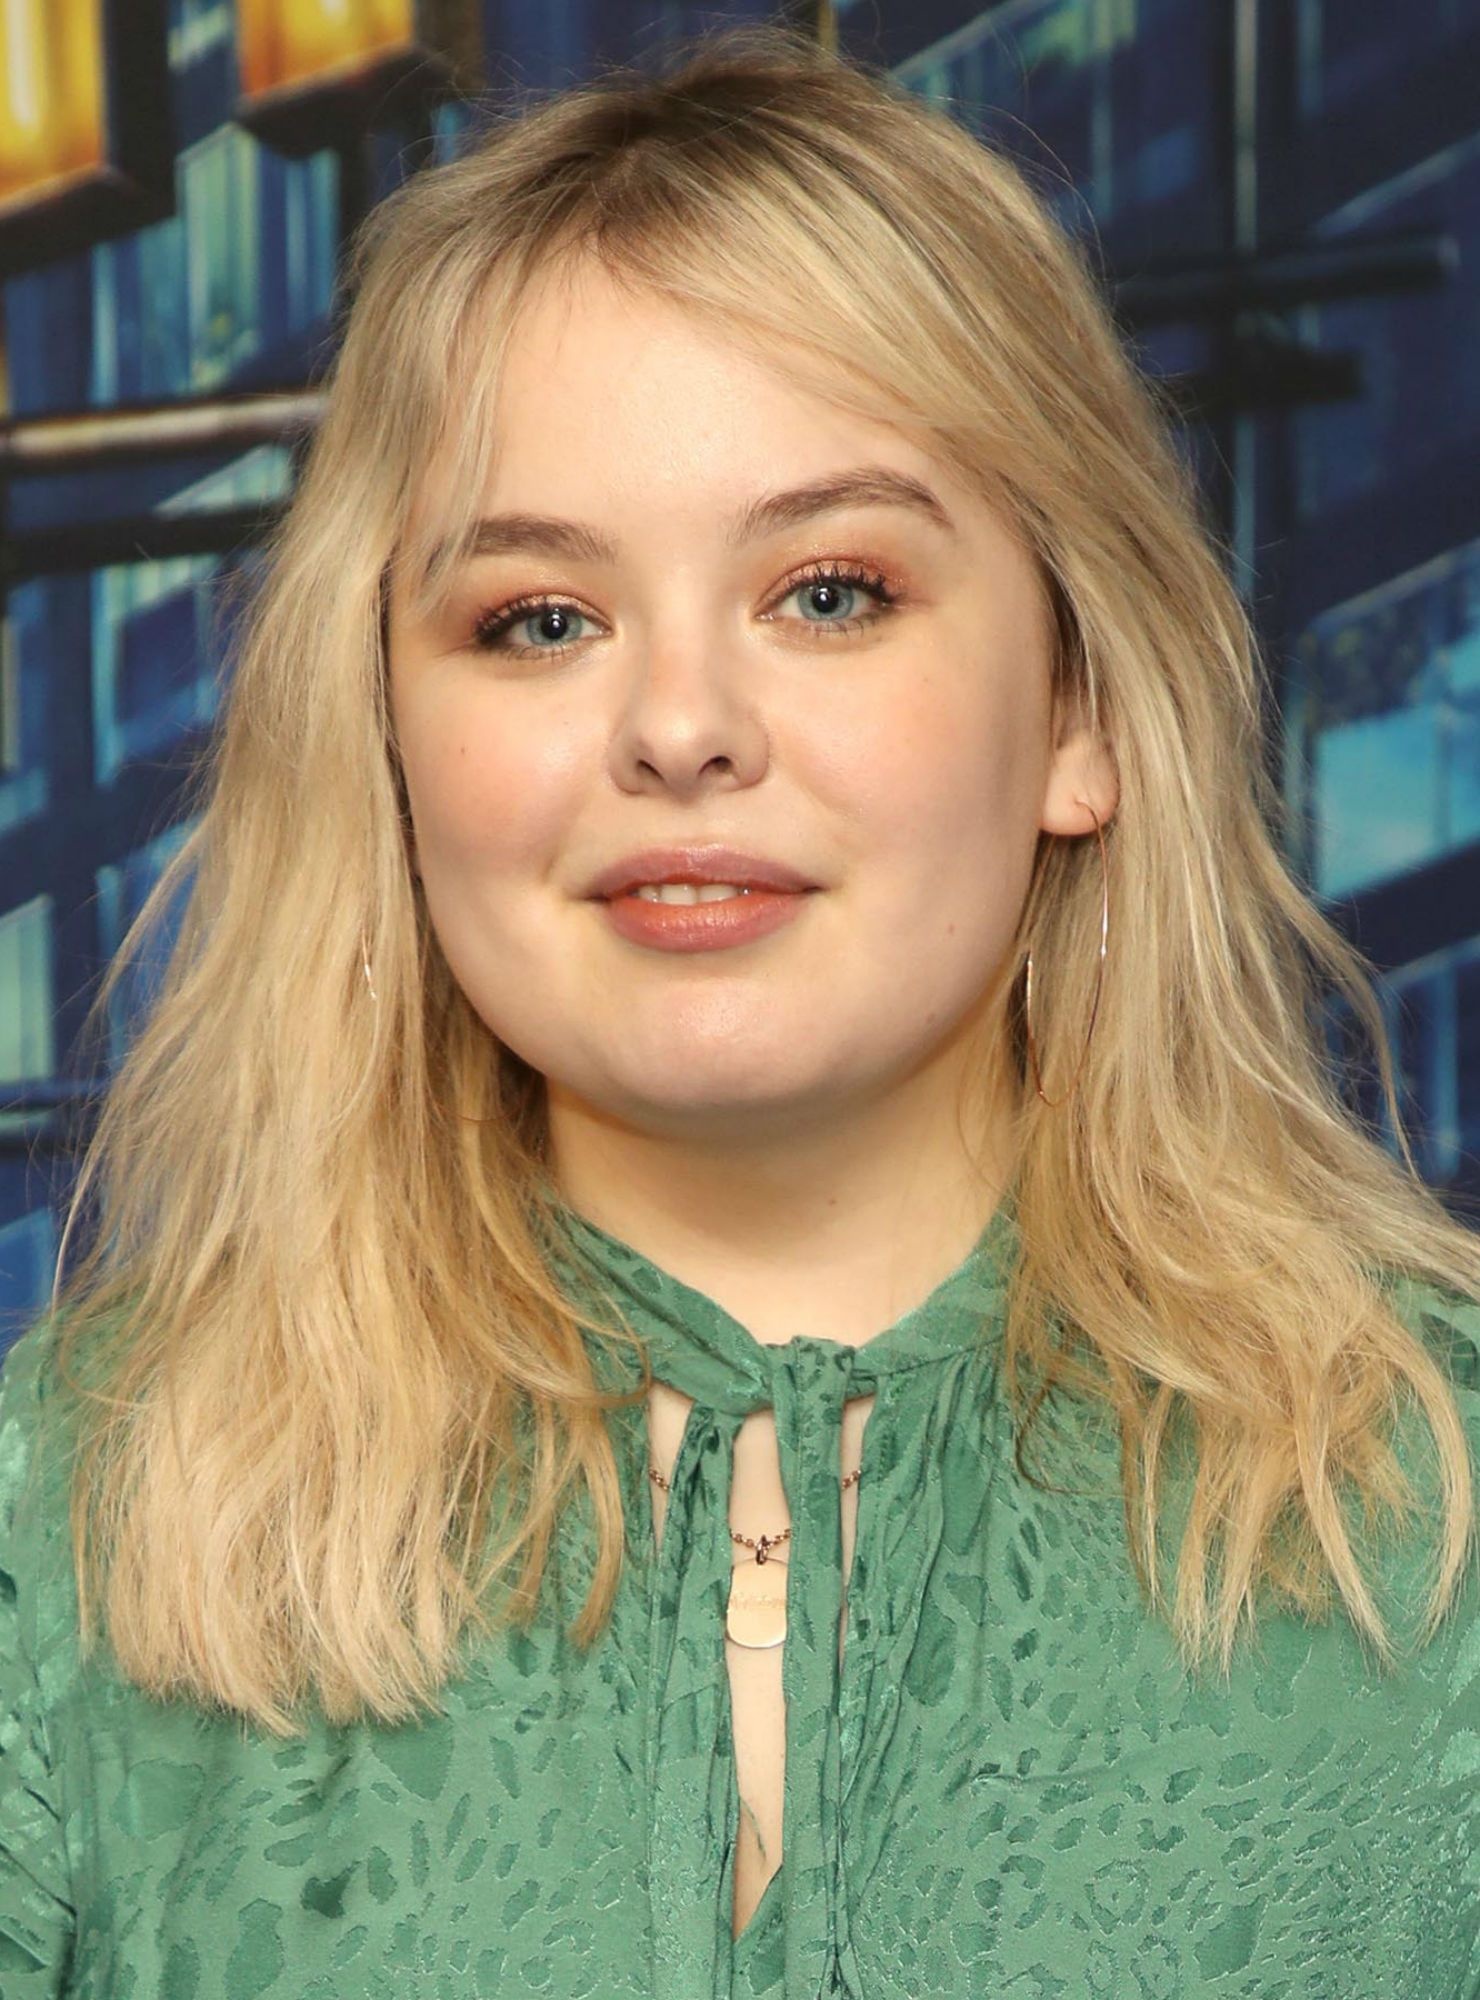 Nicola Coughlan, Insight on male nicknames, Derry Girls' perspective, Thought-provoking point, 1480x2000 HD Handy